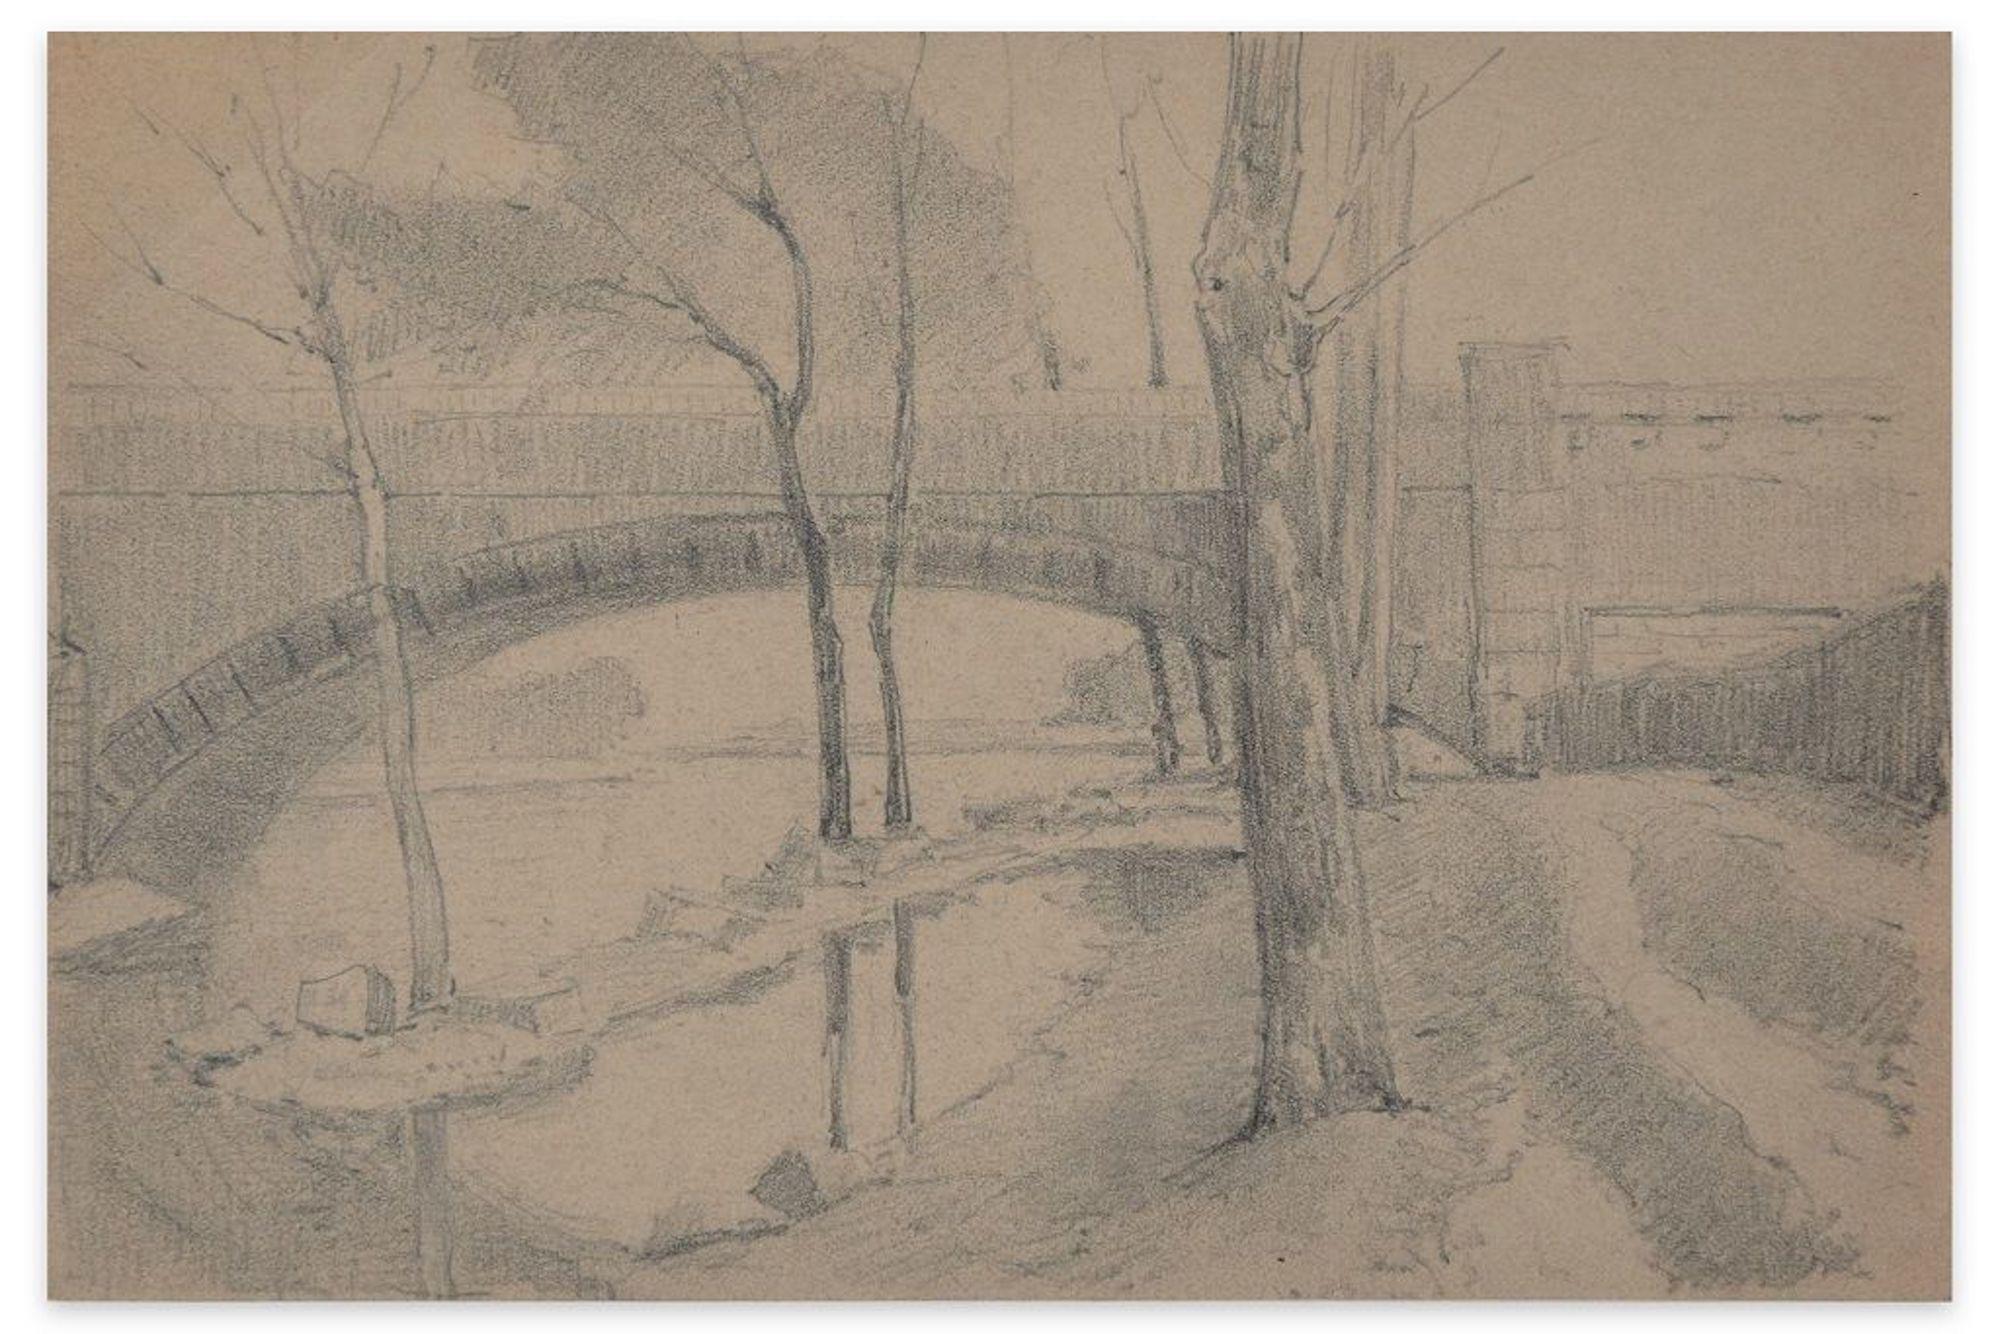 Bridge on the River - Charcoal and Pencil by E.-L. Minet - 1919